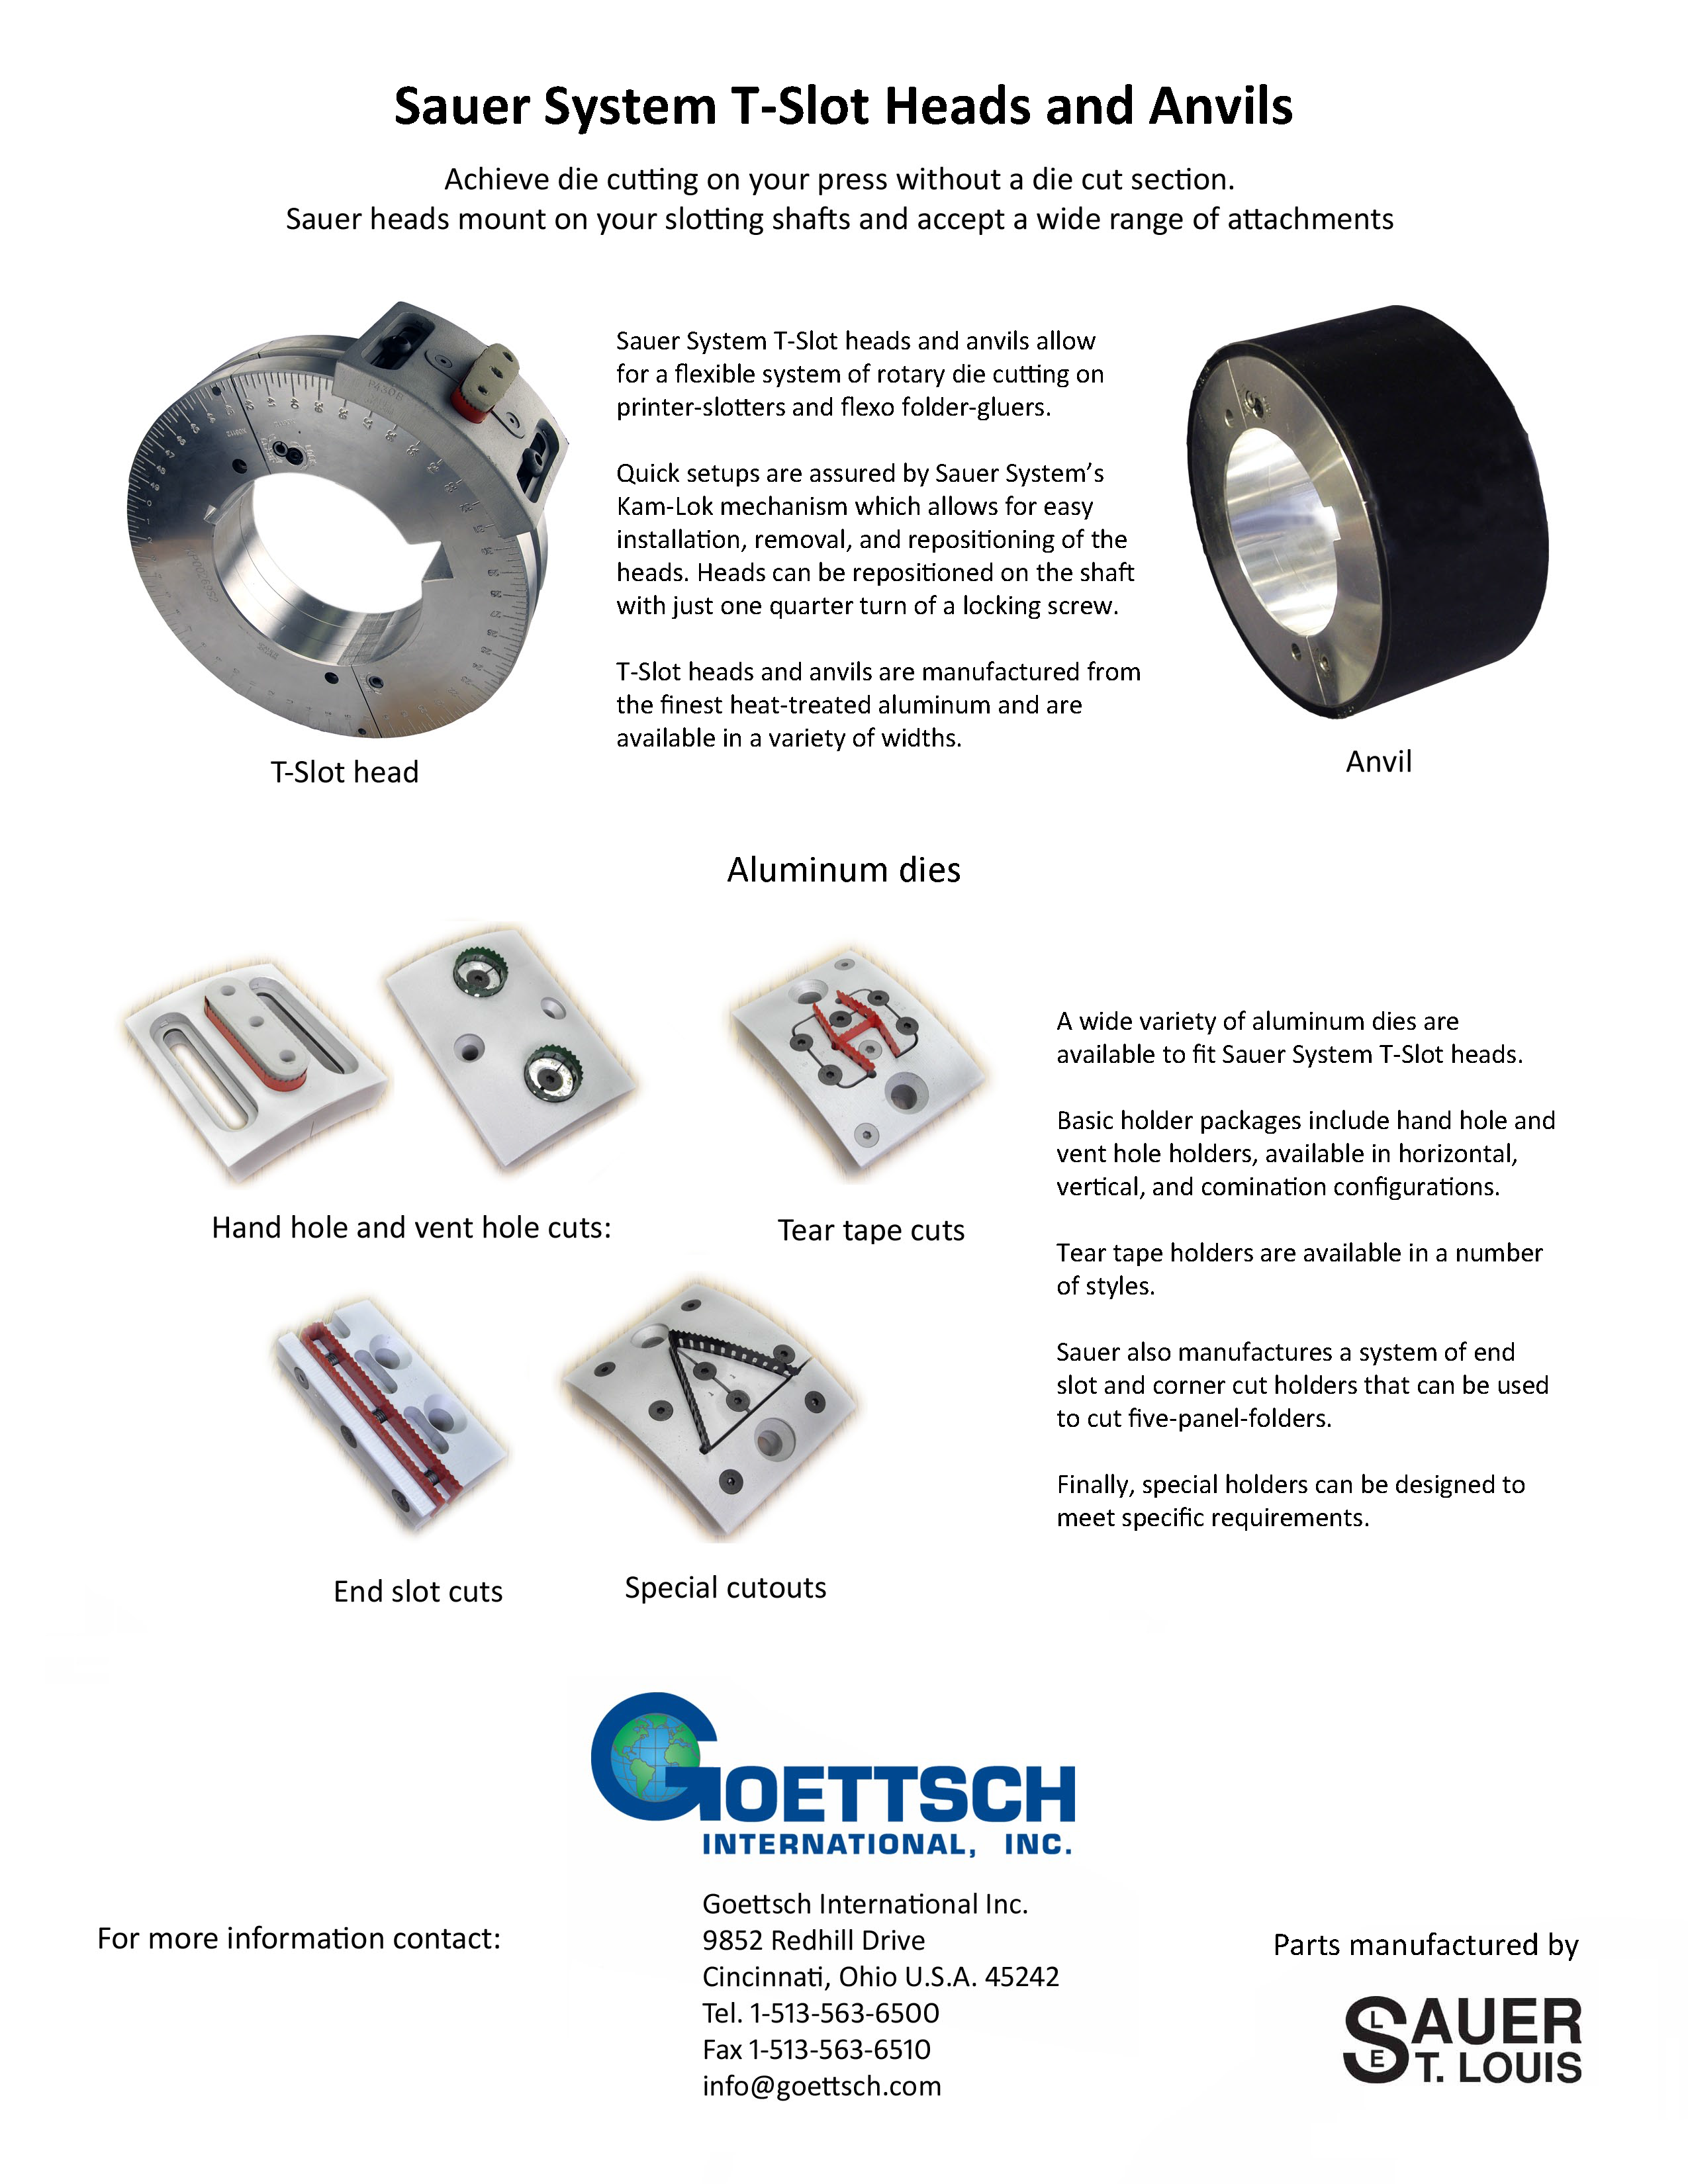 Learn more about the T-Slot Heads, Anvils and Aluminum Dies in the Sauer System brochure